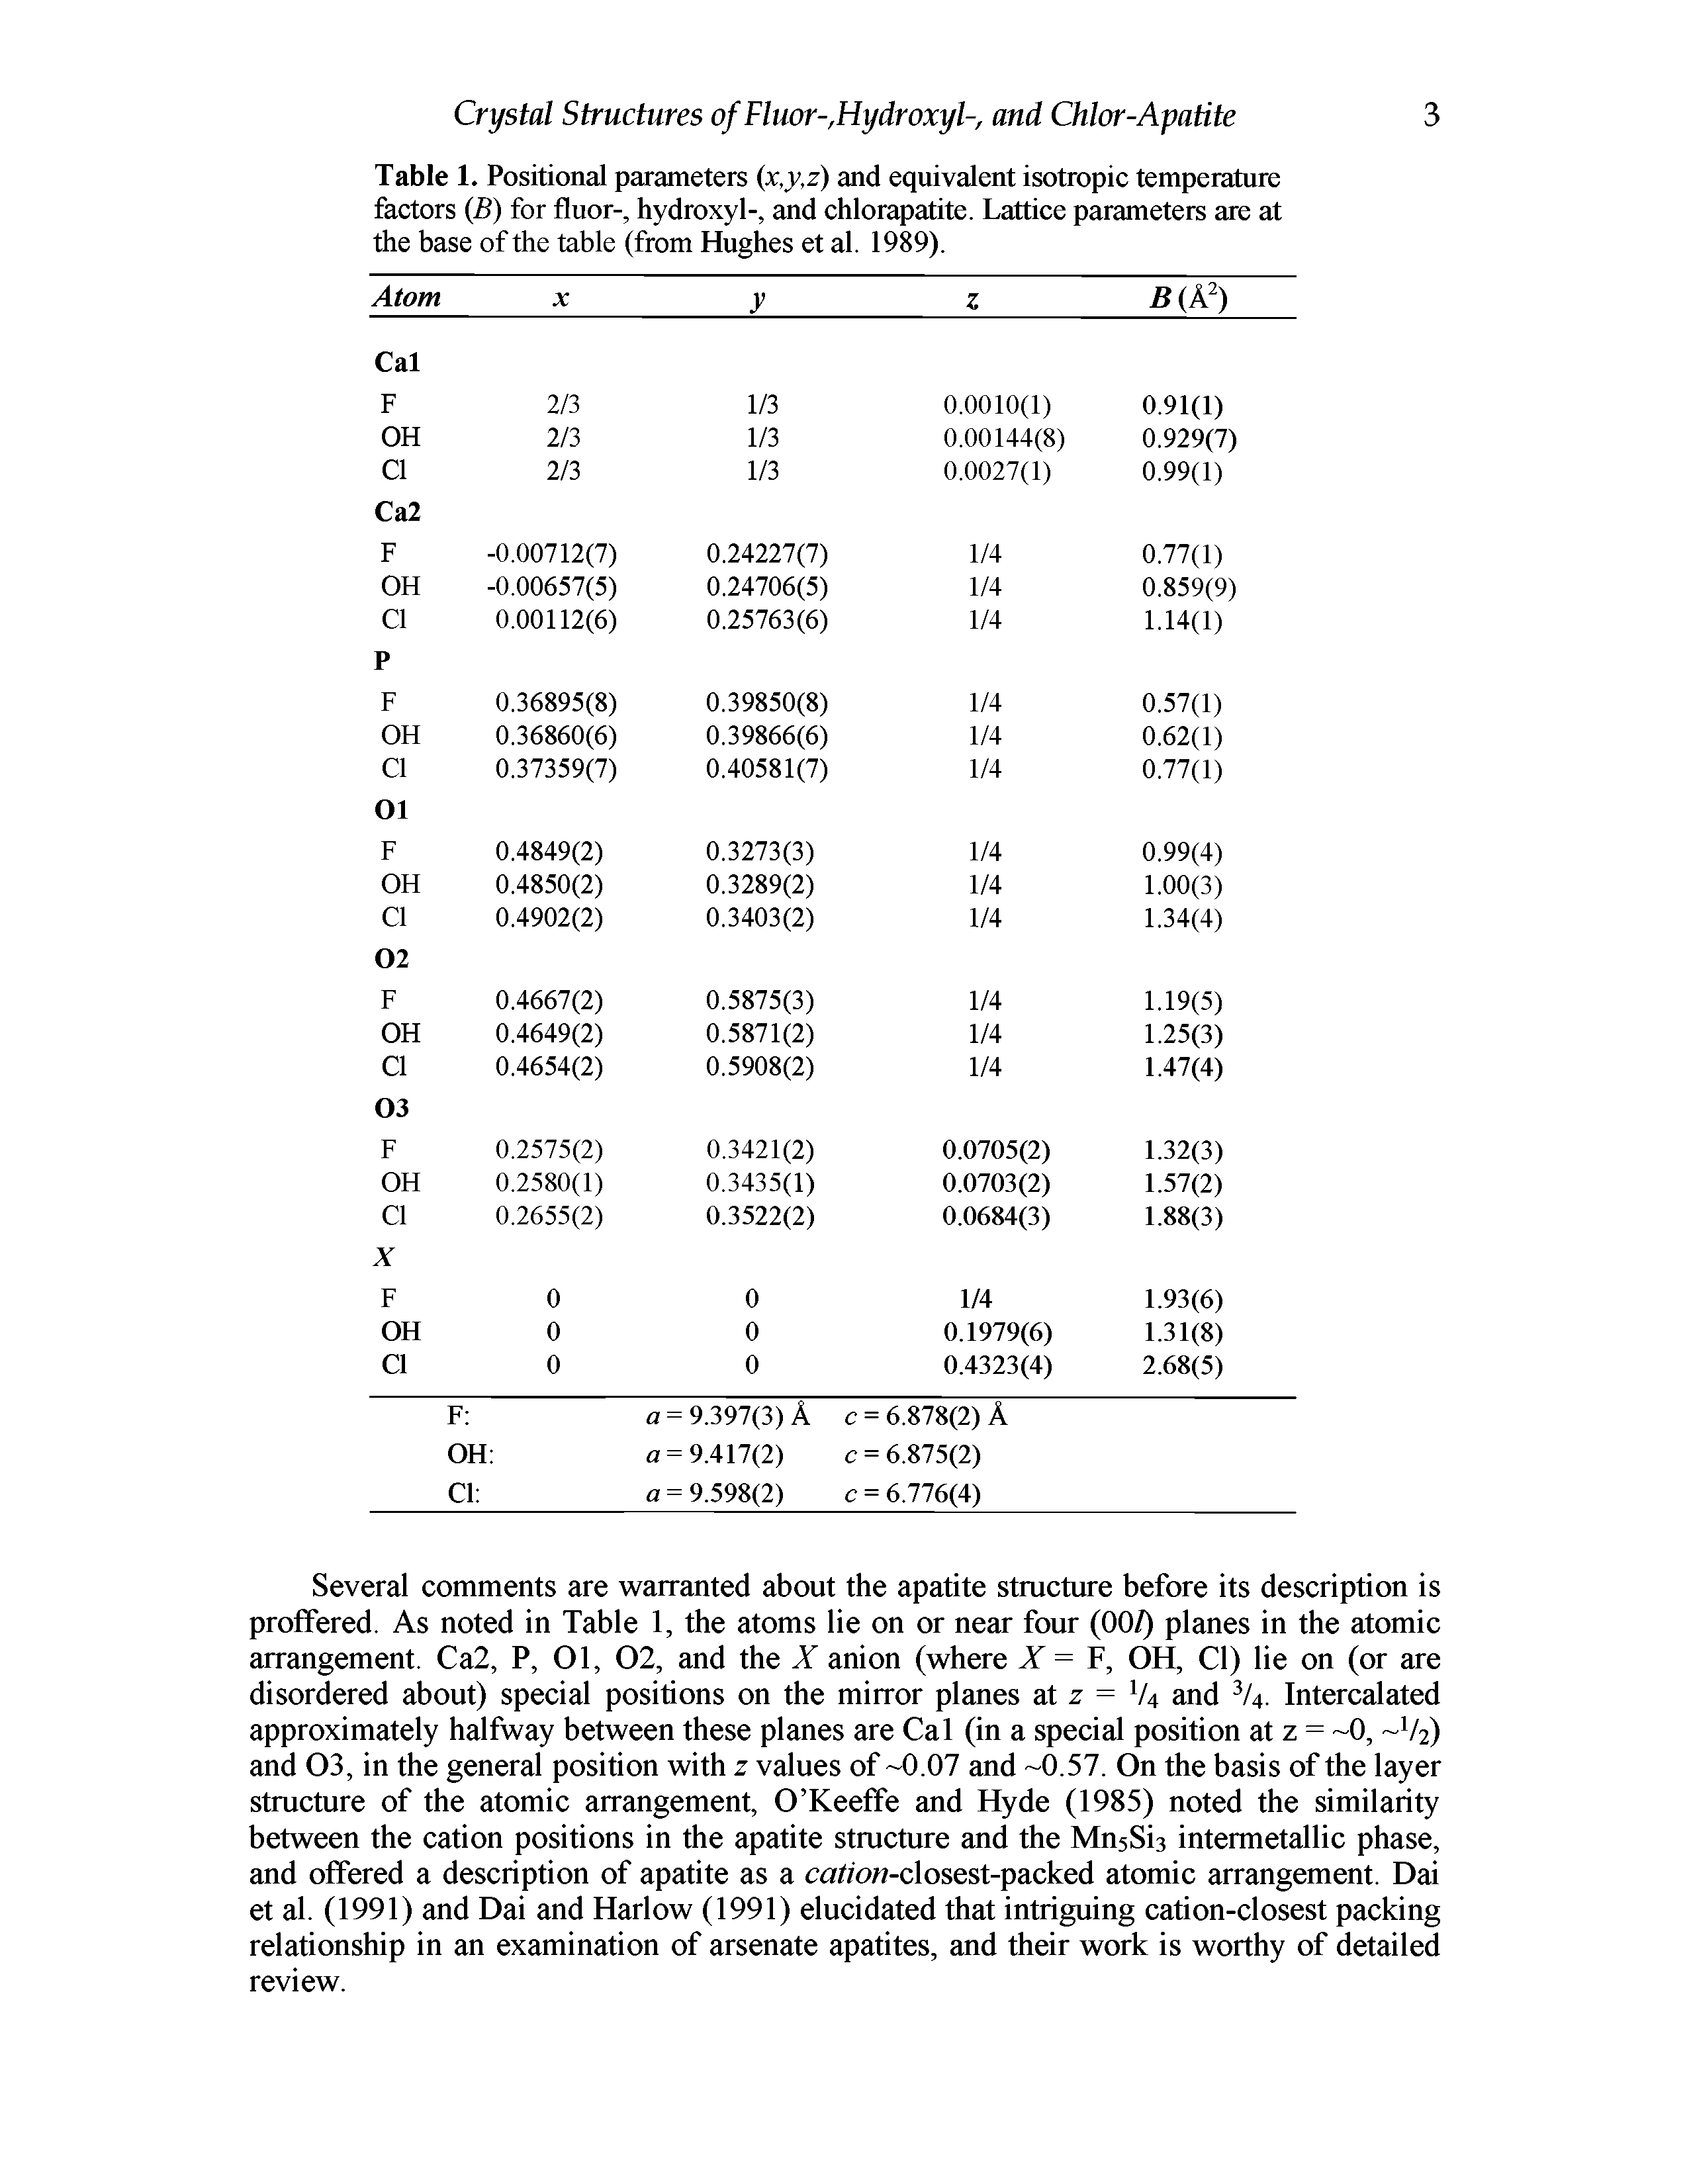 Table 1. Positional parameters (x,y,z) and equivalent isotropic temperature factors (B) for fluor-, hydroxyl-, and chlorapatite. Lattice parameters are at the base of the table (from Hughes et al. 1989).